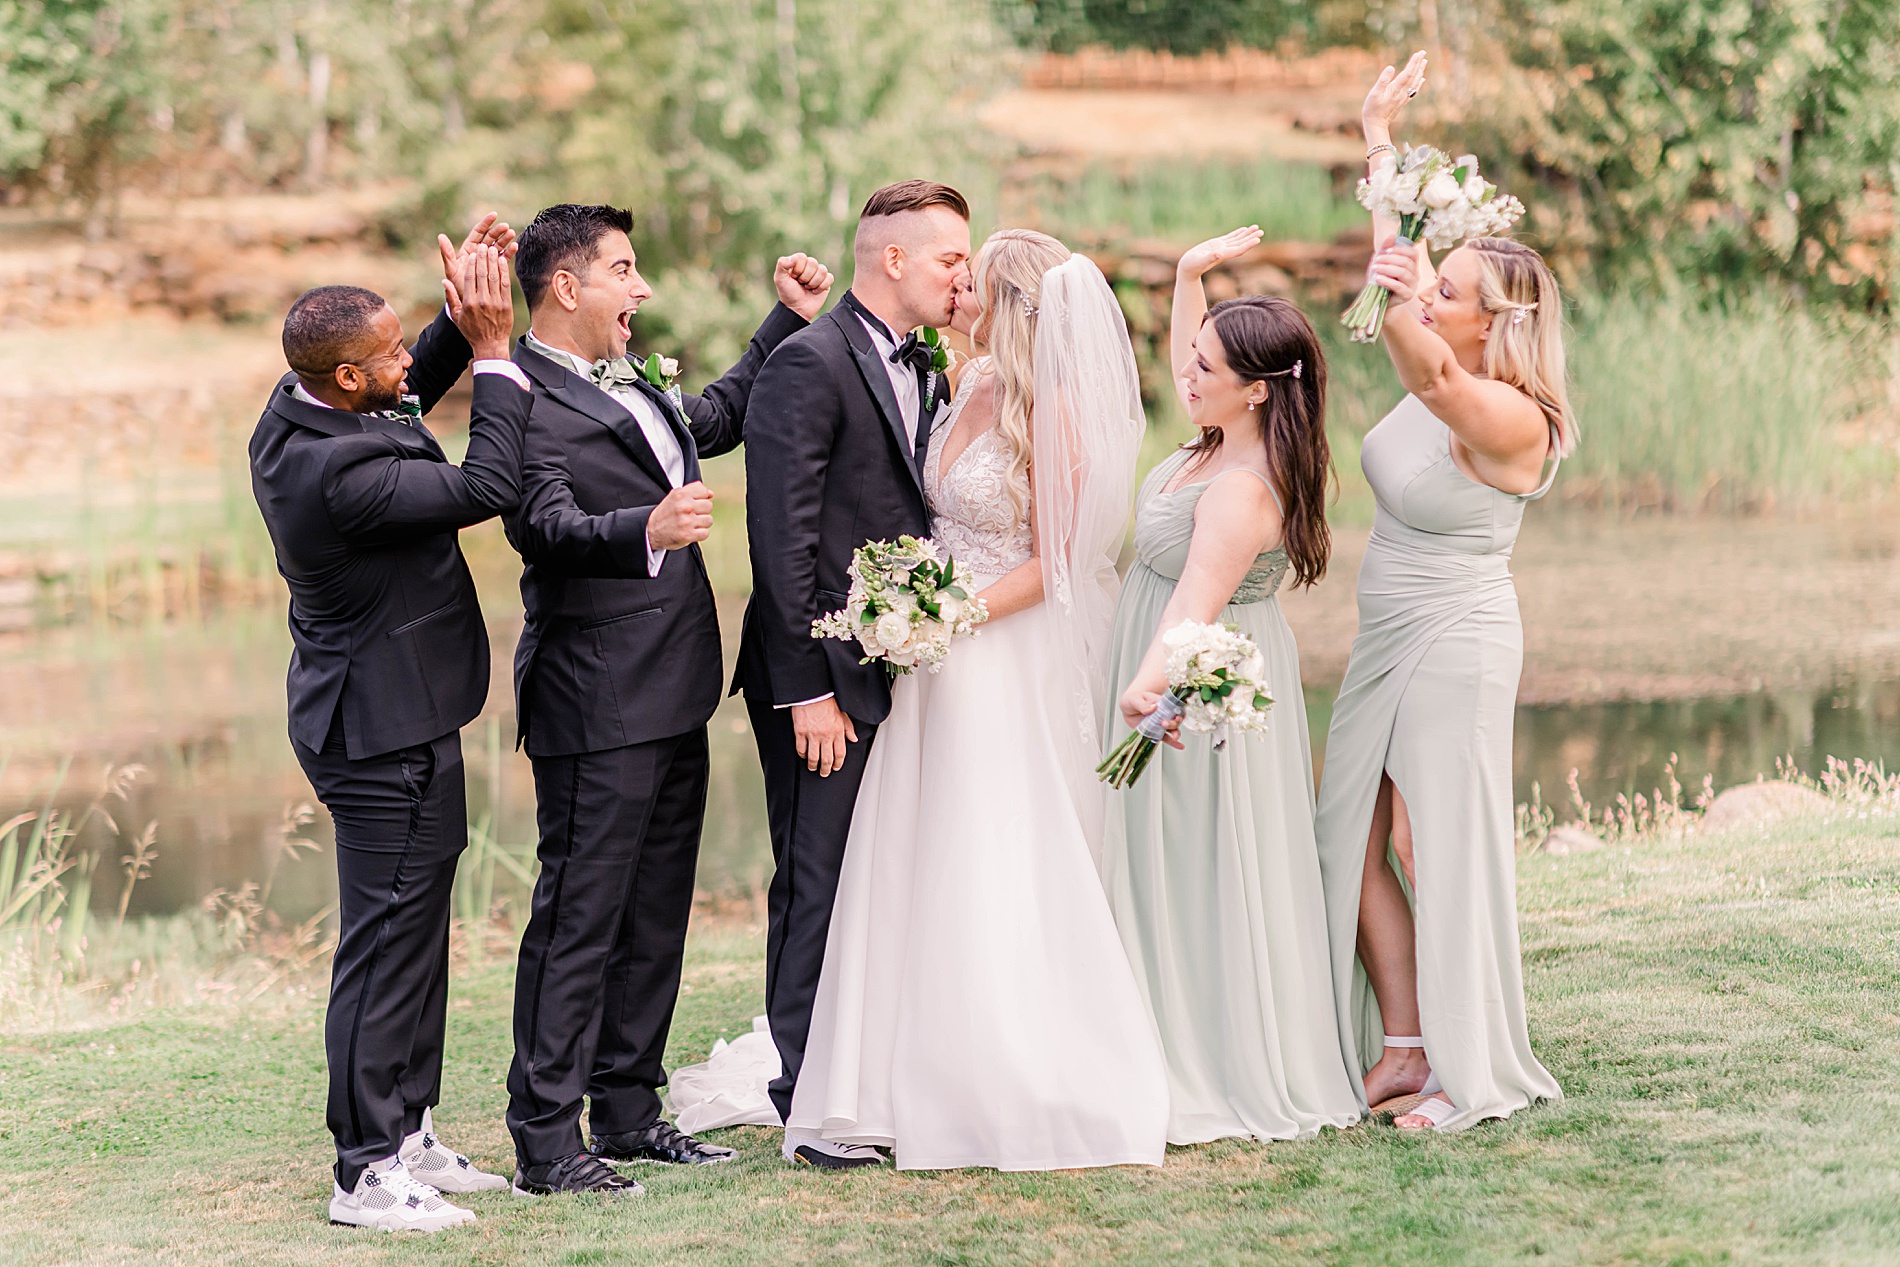 bride and groom kiss with their wedding party cheering them on